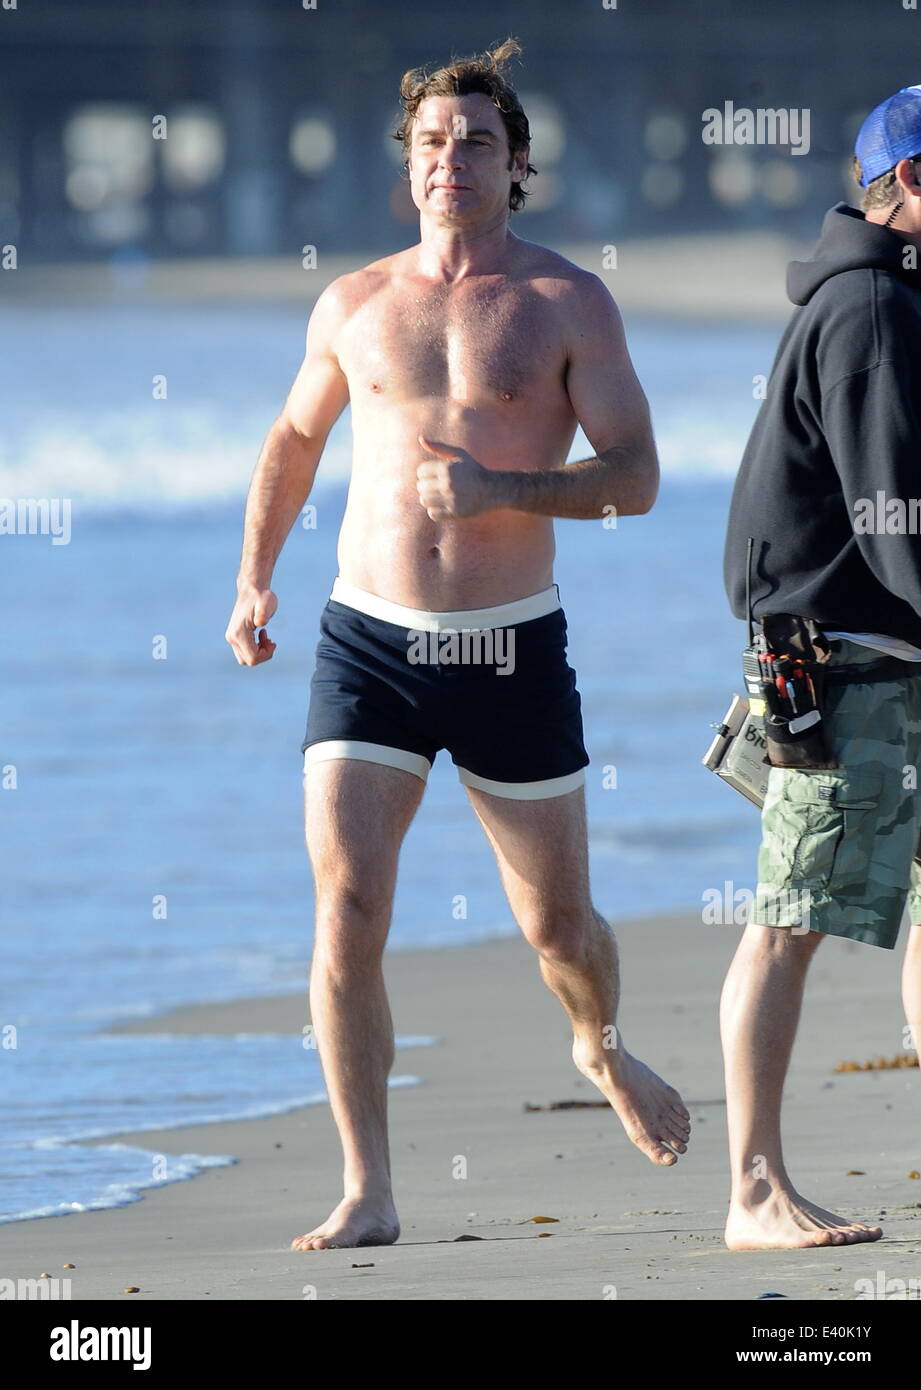 Liev Schreiber shows off his toned body on the filmset of "Pawn Sacrifice"  filming on Santa Monica Beach. The hunky actor was seen flexing his biceps  and running around the beach while